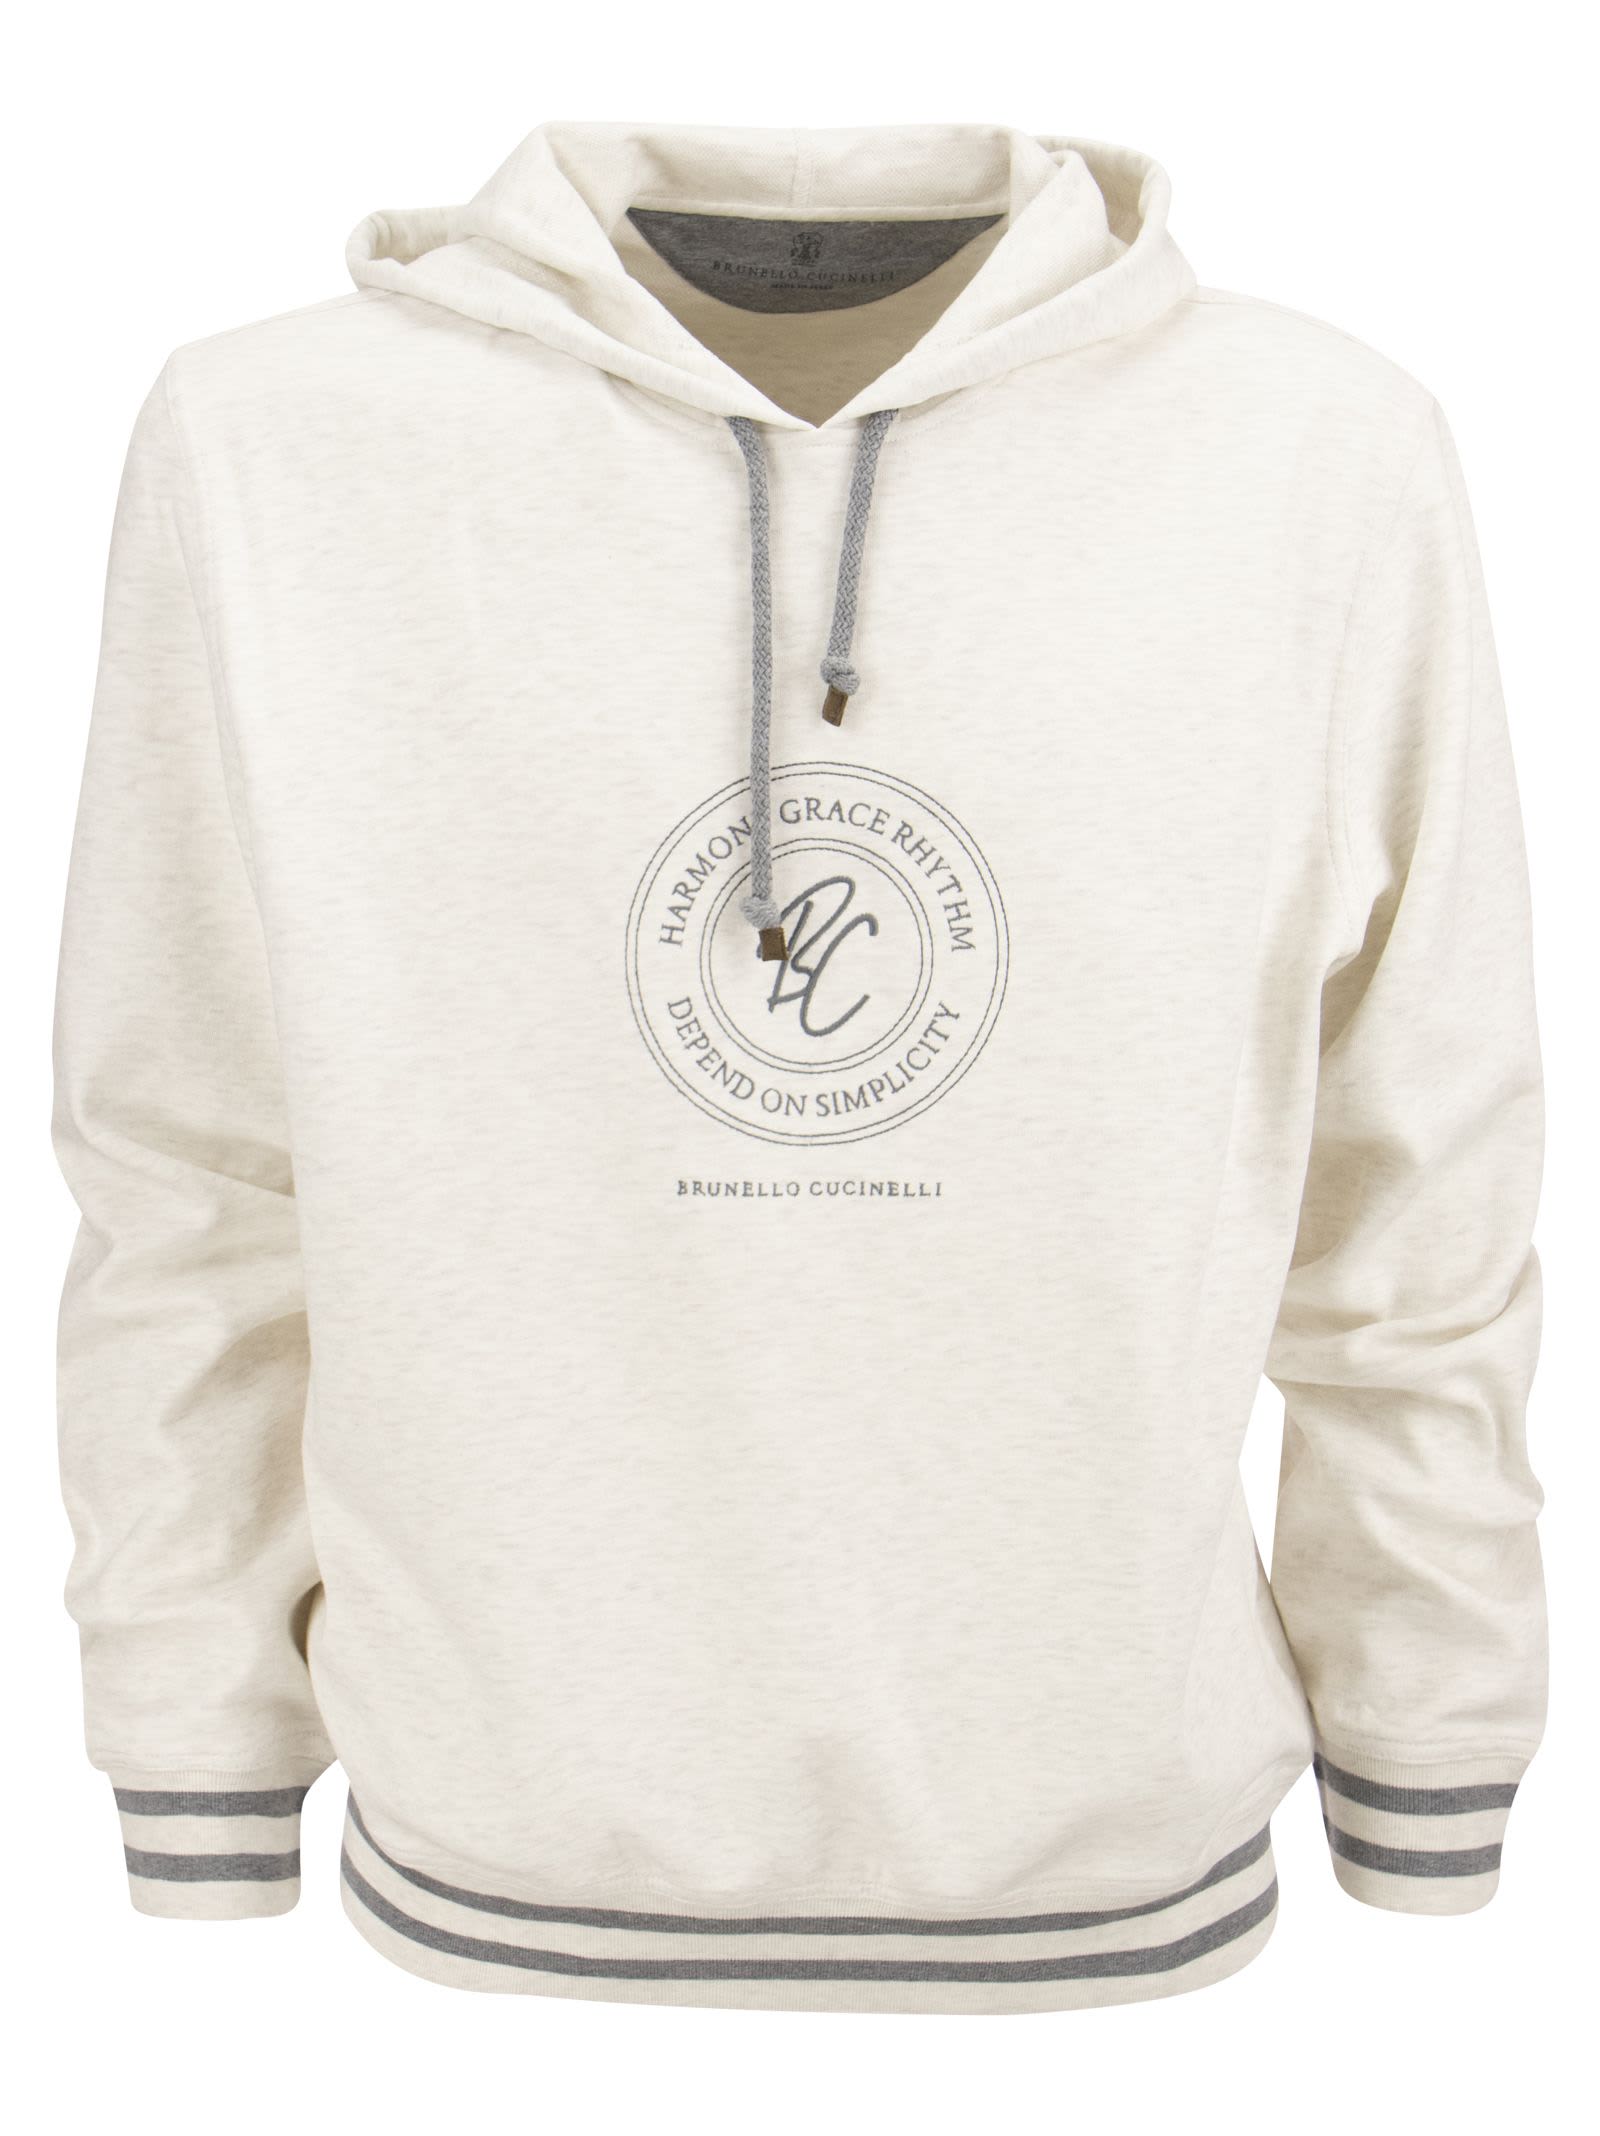 Brunello Cucinelli Cotton Techno Fleece Hooded Topwear With Embroidery And Striped Knit Details